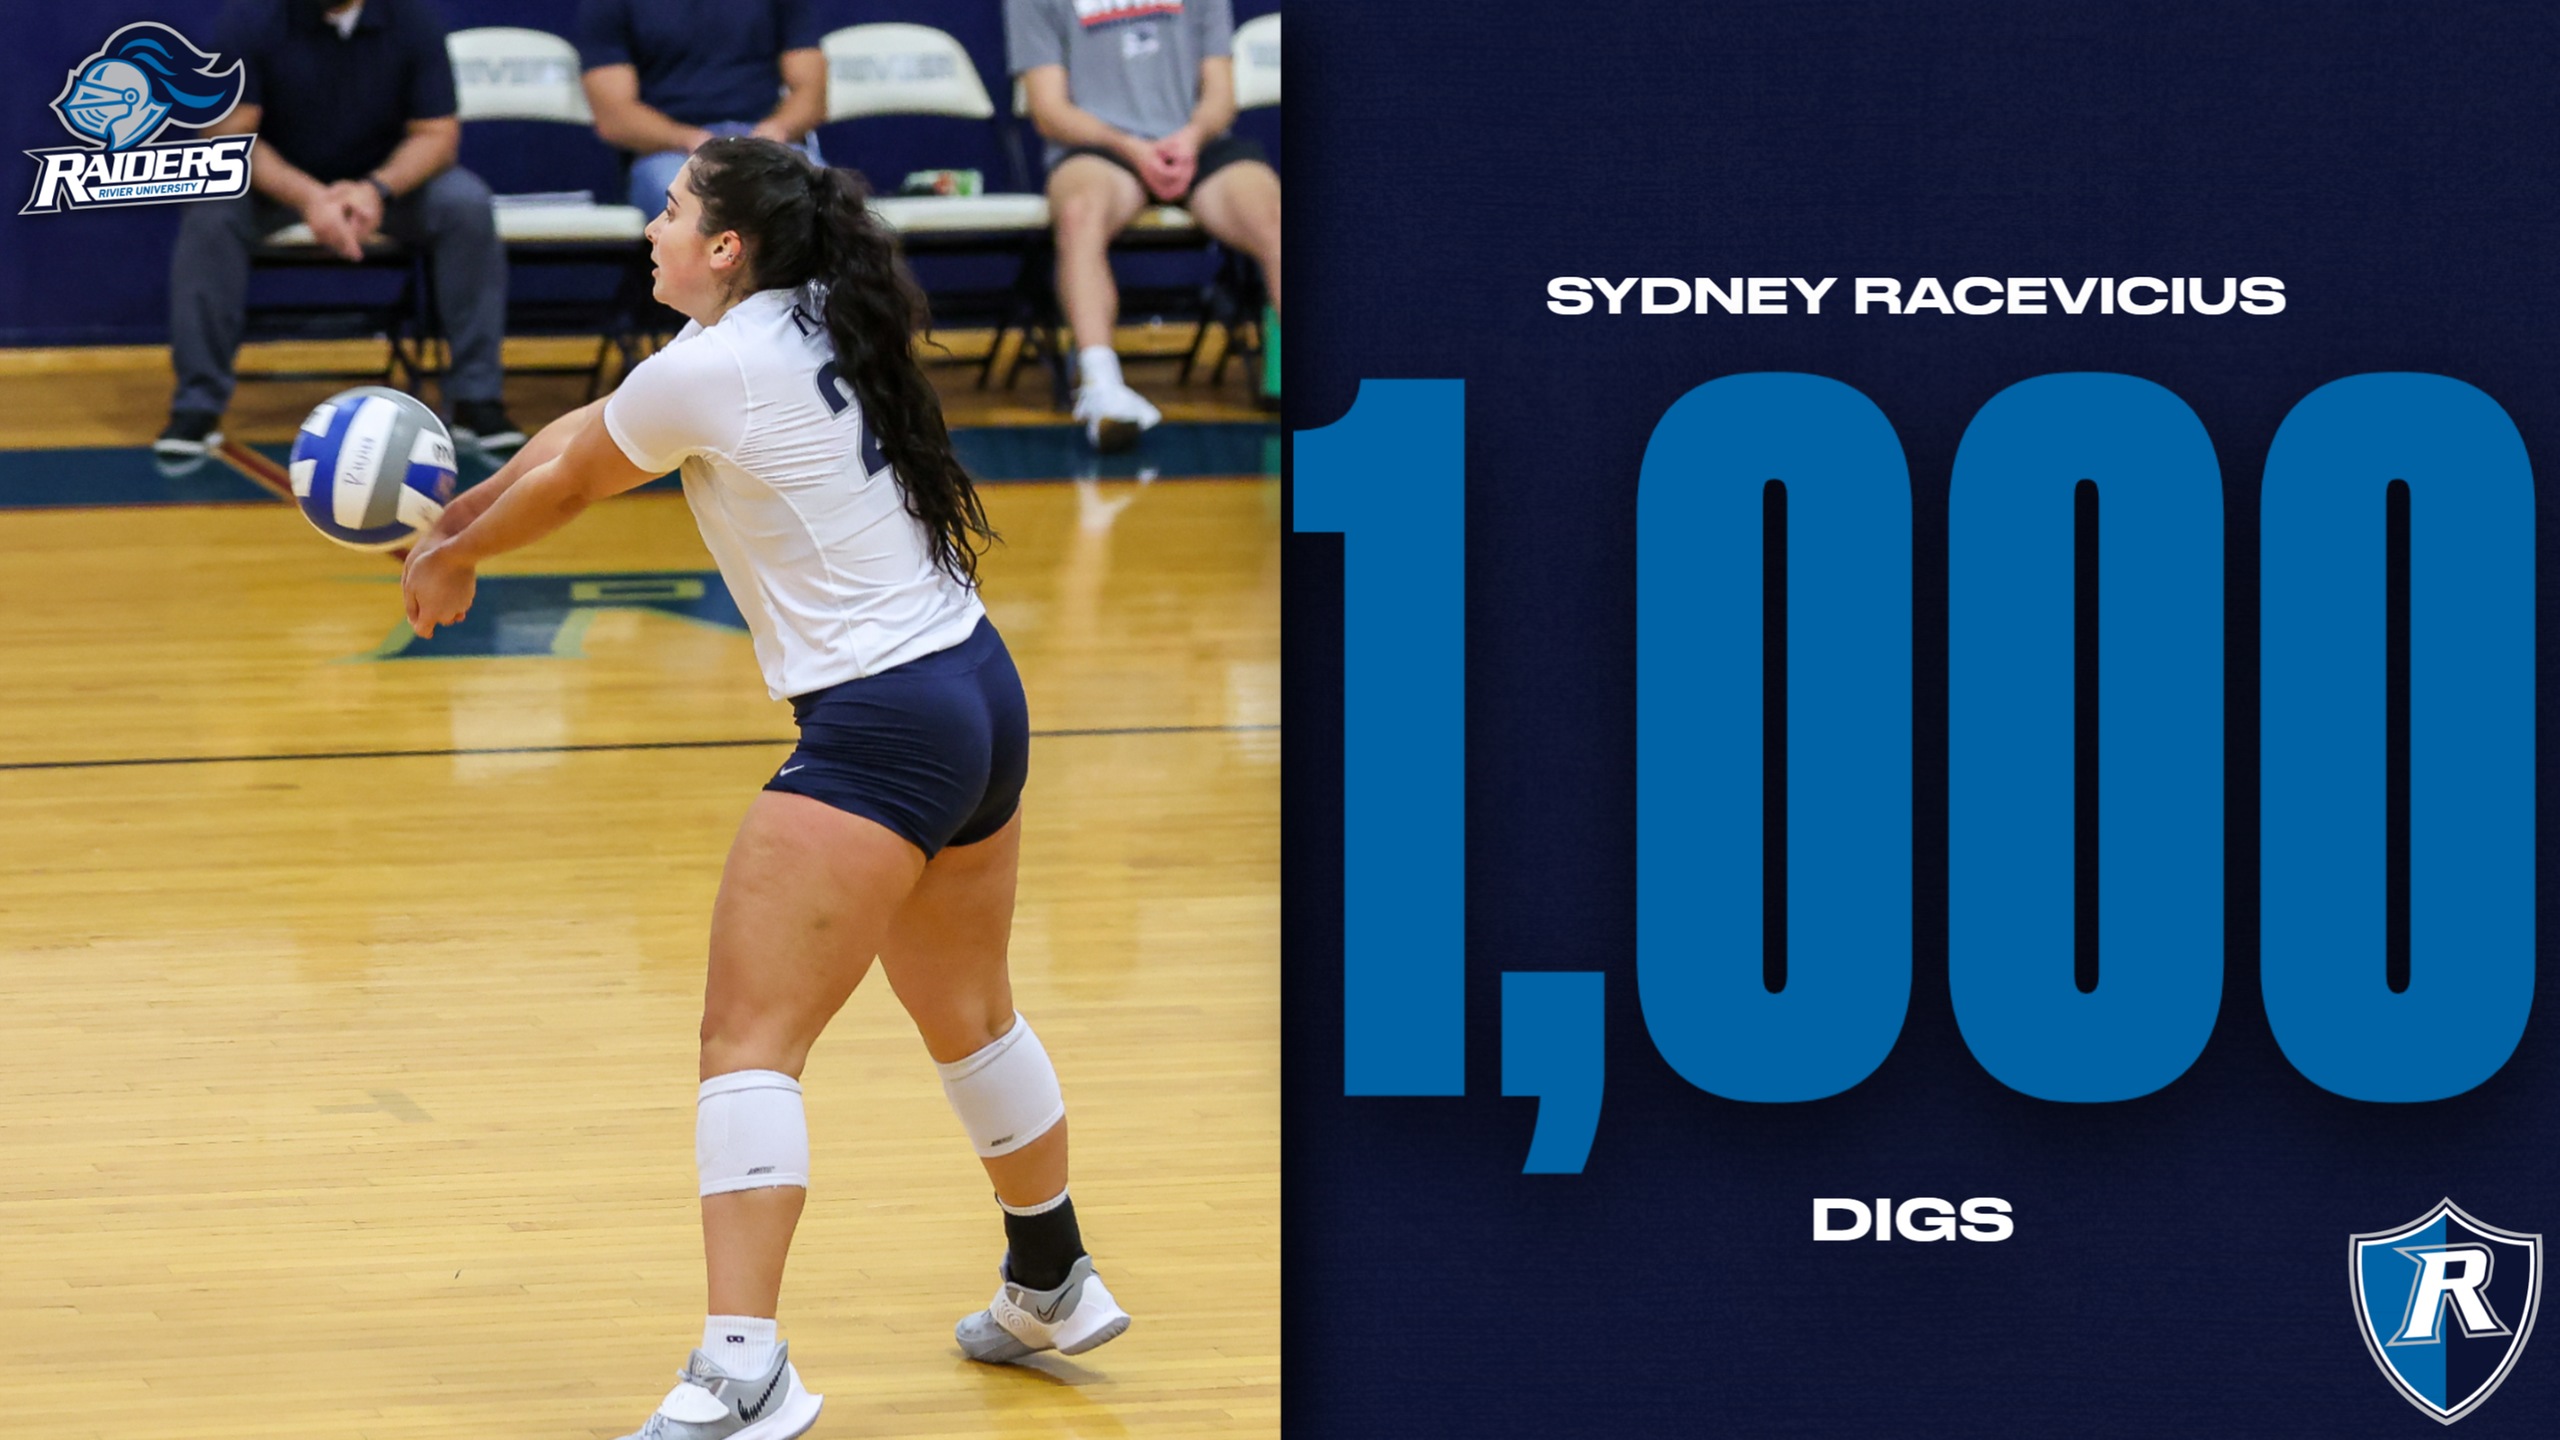 Racevicius Reaches 1,000 Digs in Win Over Southern Maine